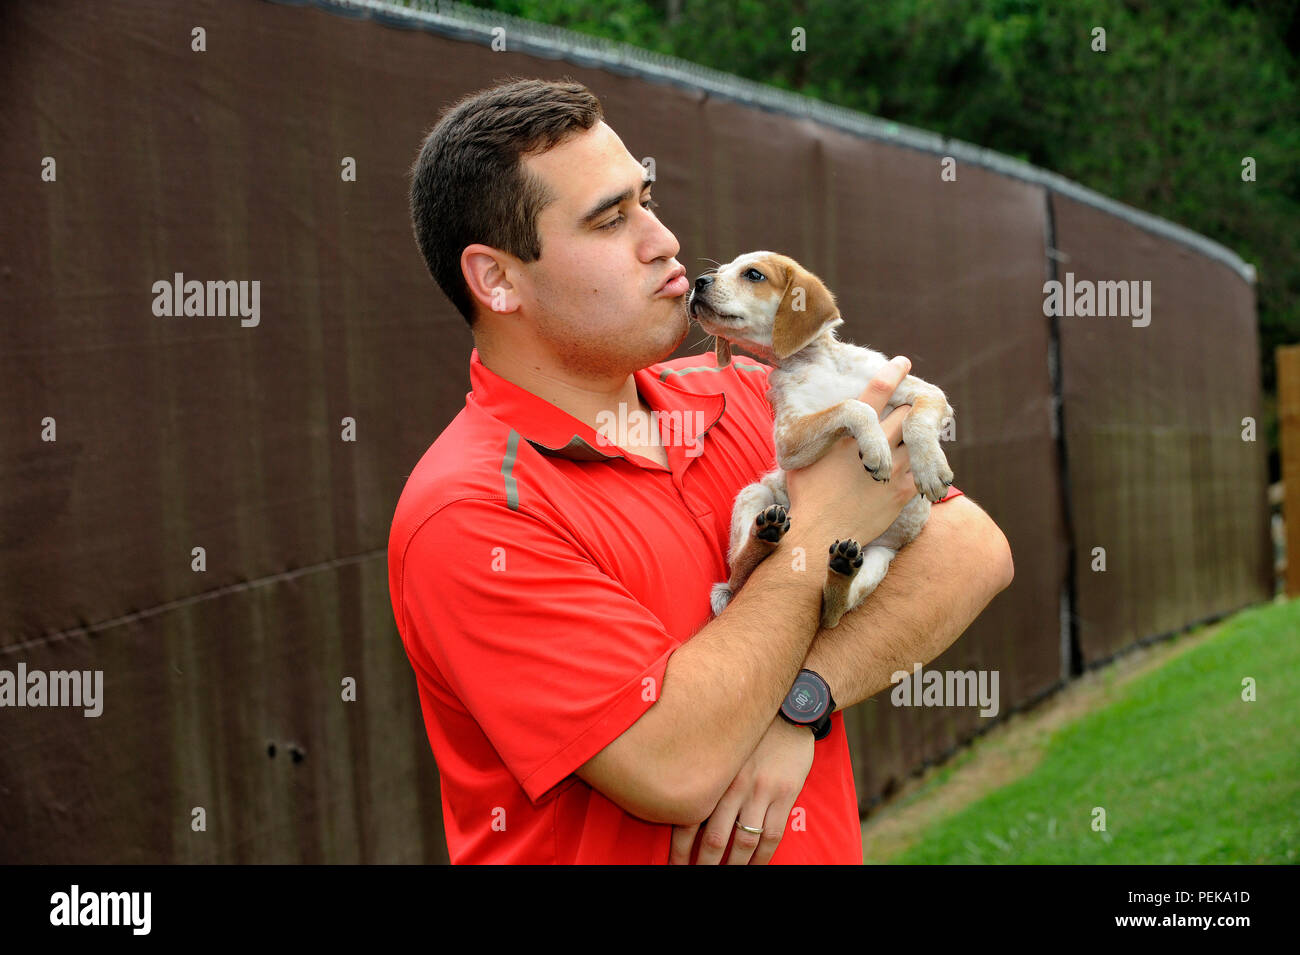 A young puppy, up for adoption, is consoled by a Latino male staff member of a local animal shelter in Gainesville, Georgia © Billy Grimes/Alamy.com Stock Photo